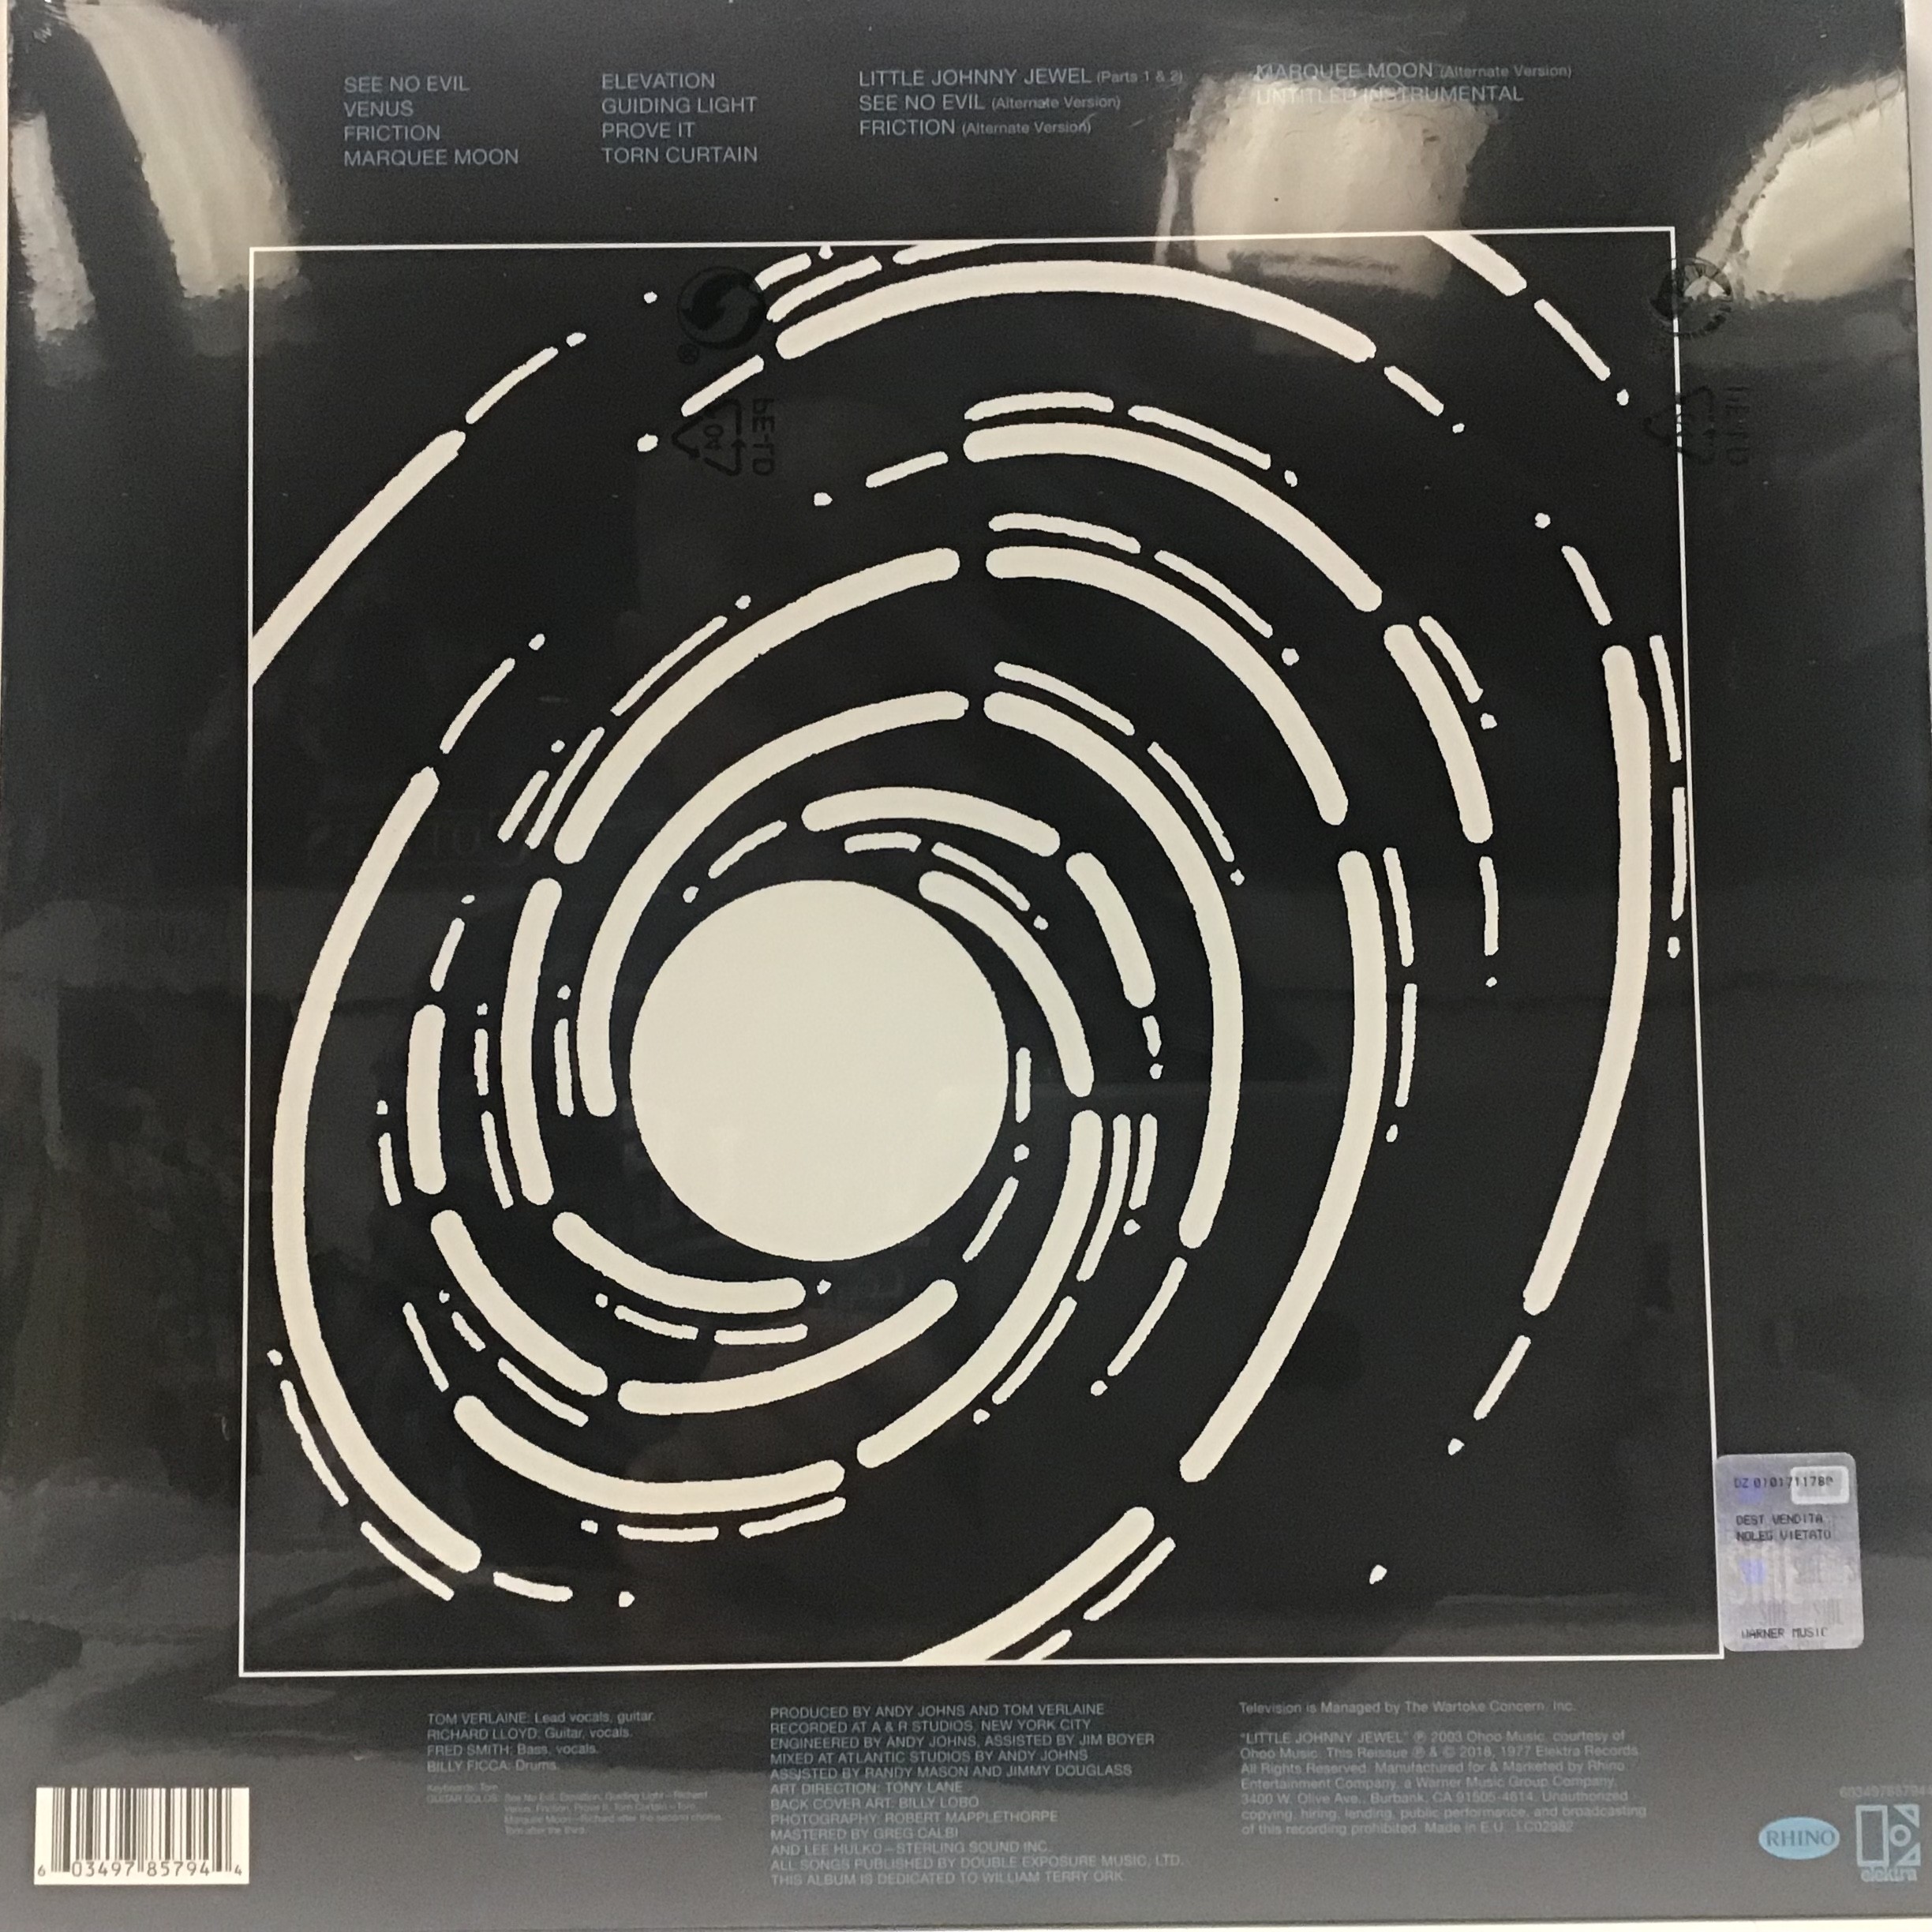 TELEVISION ‘MARQUEE MOON’ DOUBLE BLUE VINYL ALBUM. This edition is from 2018 and found on this - Image 2 of 2